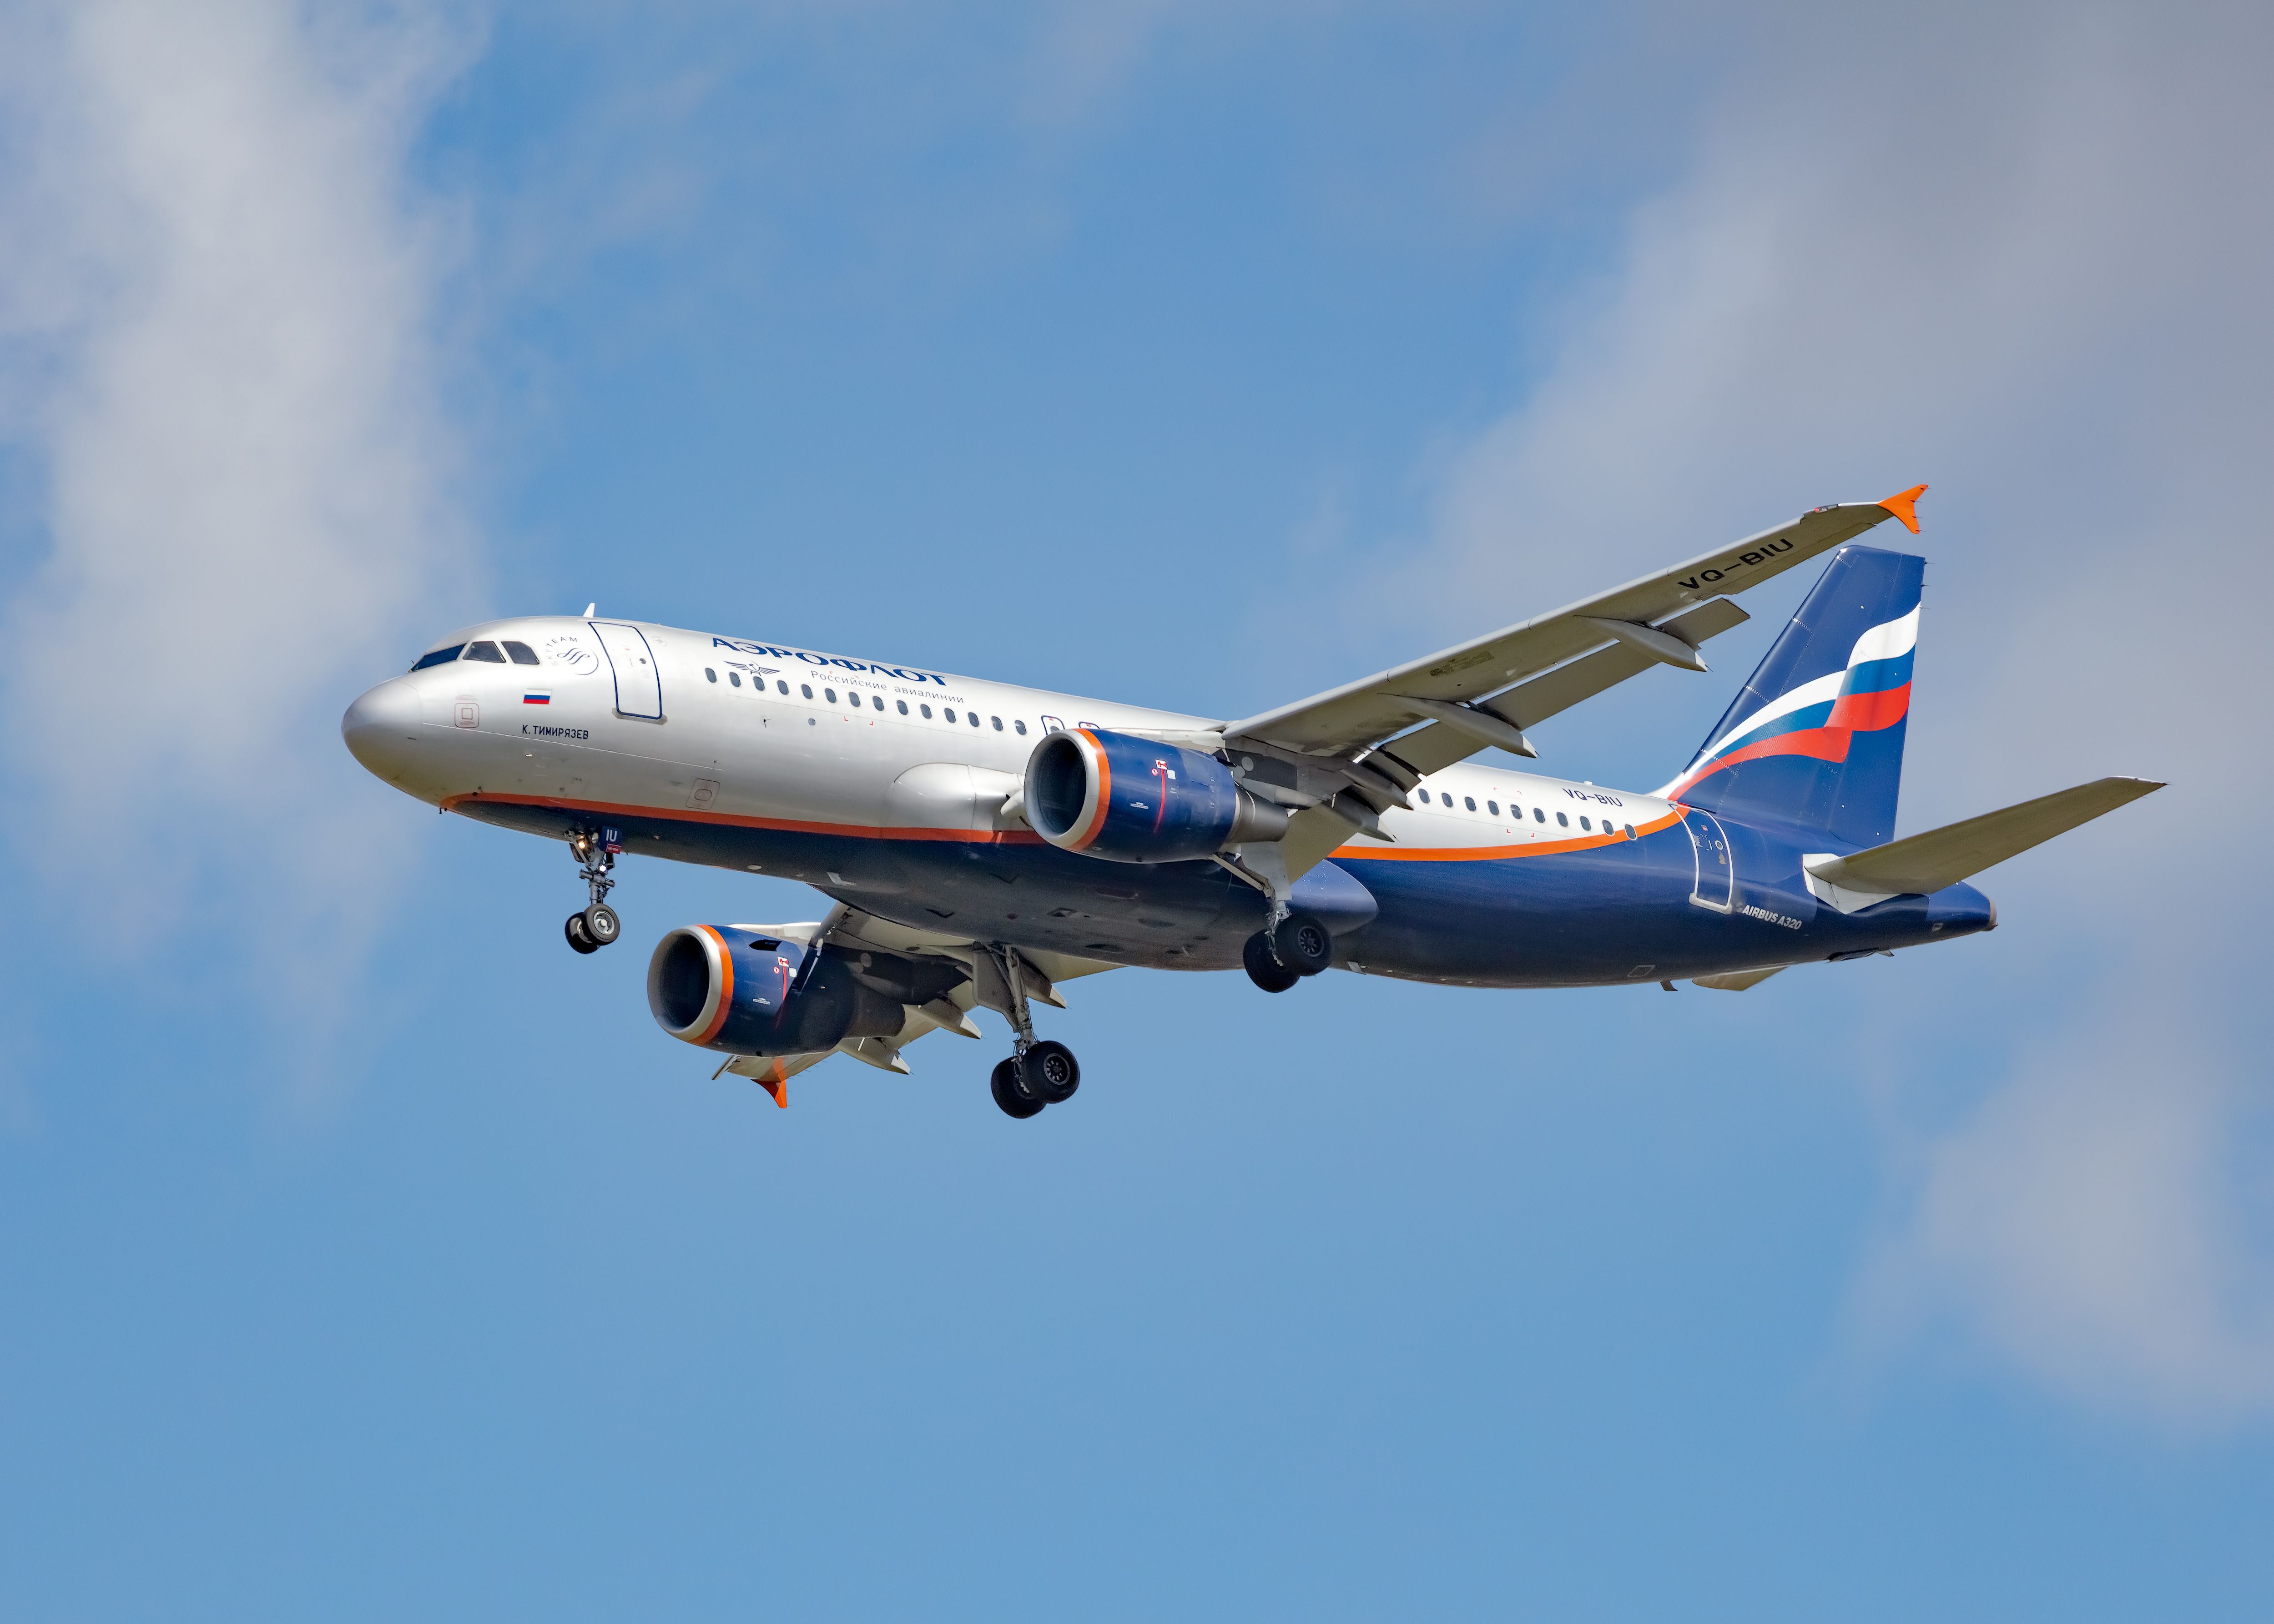 Russian Airline Seat Capacity Expected To Witness 22% Growth